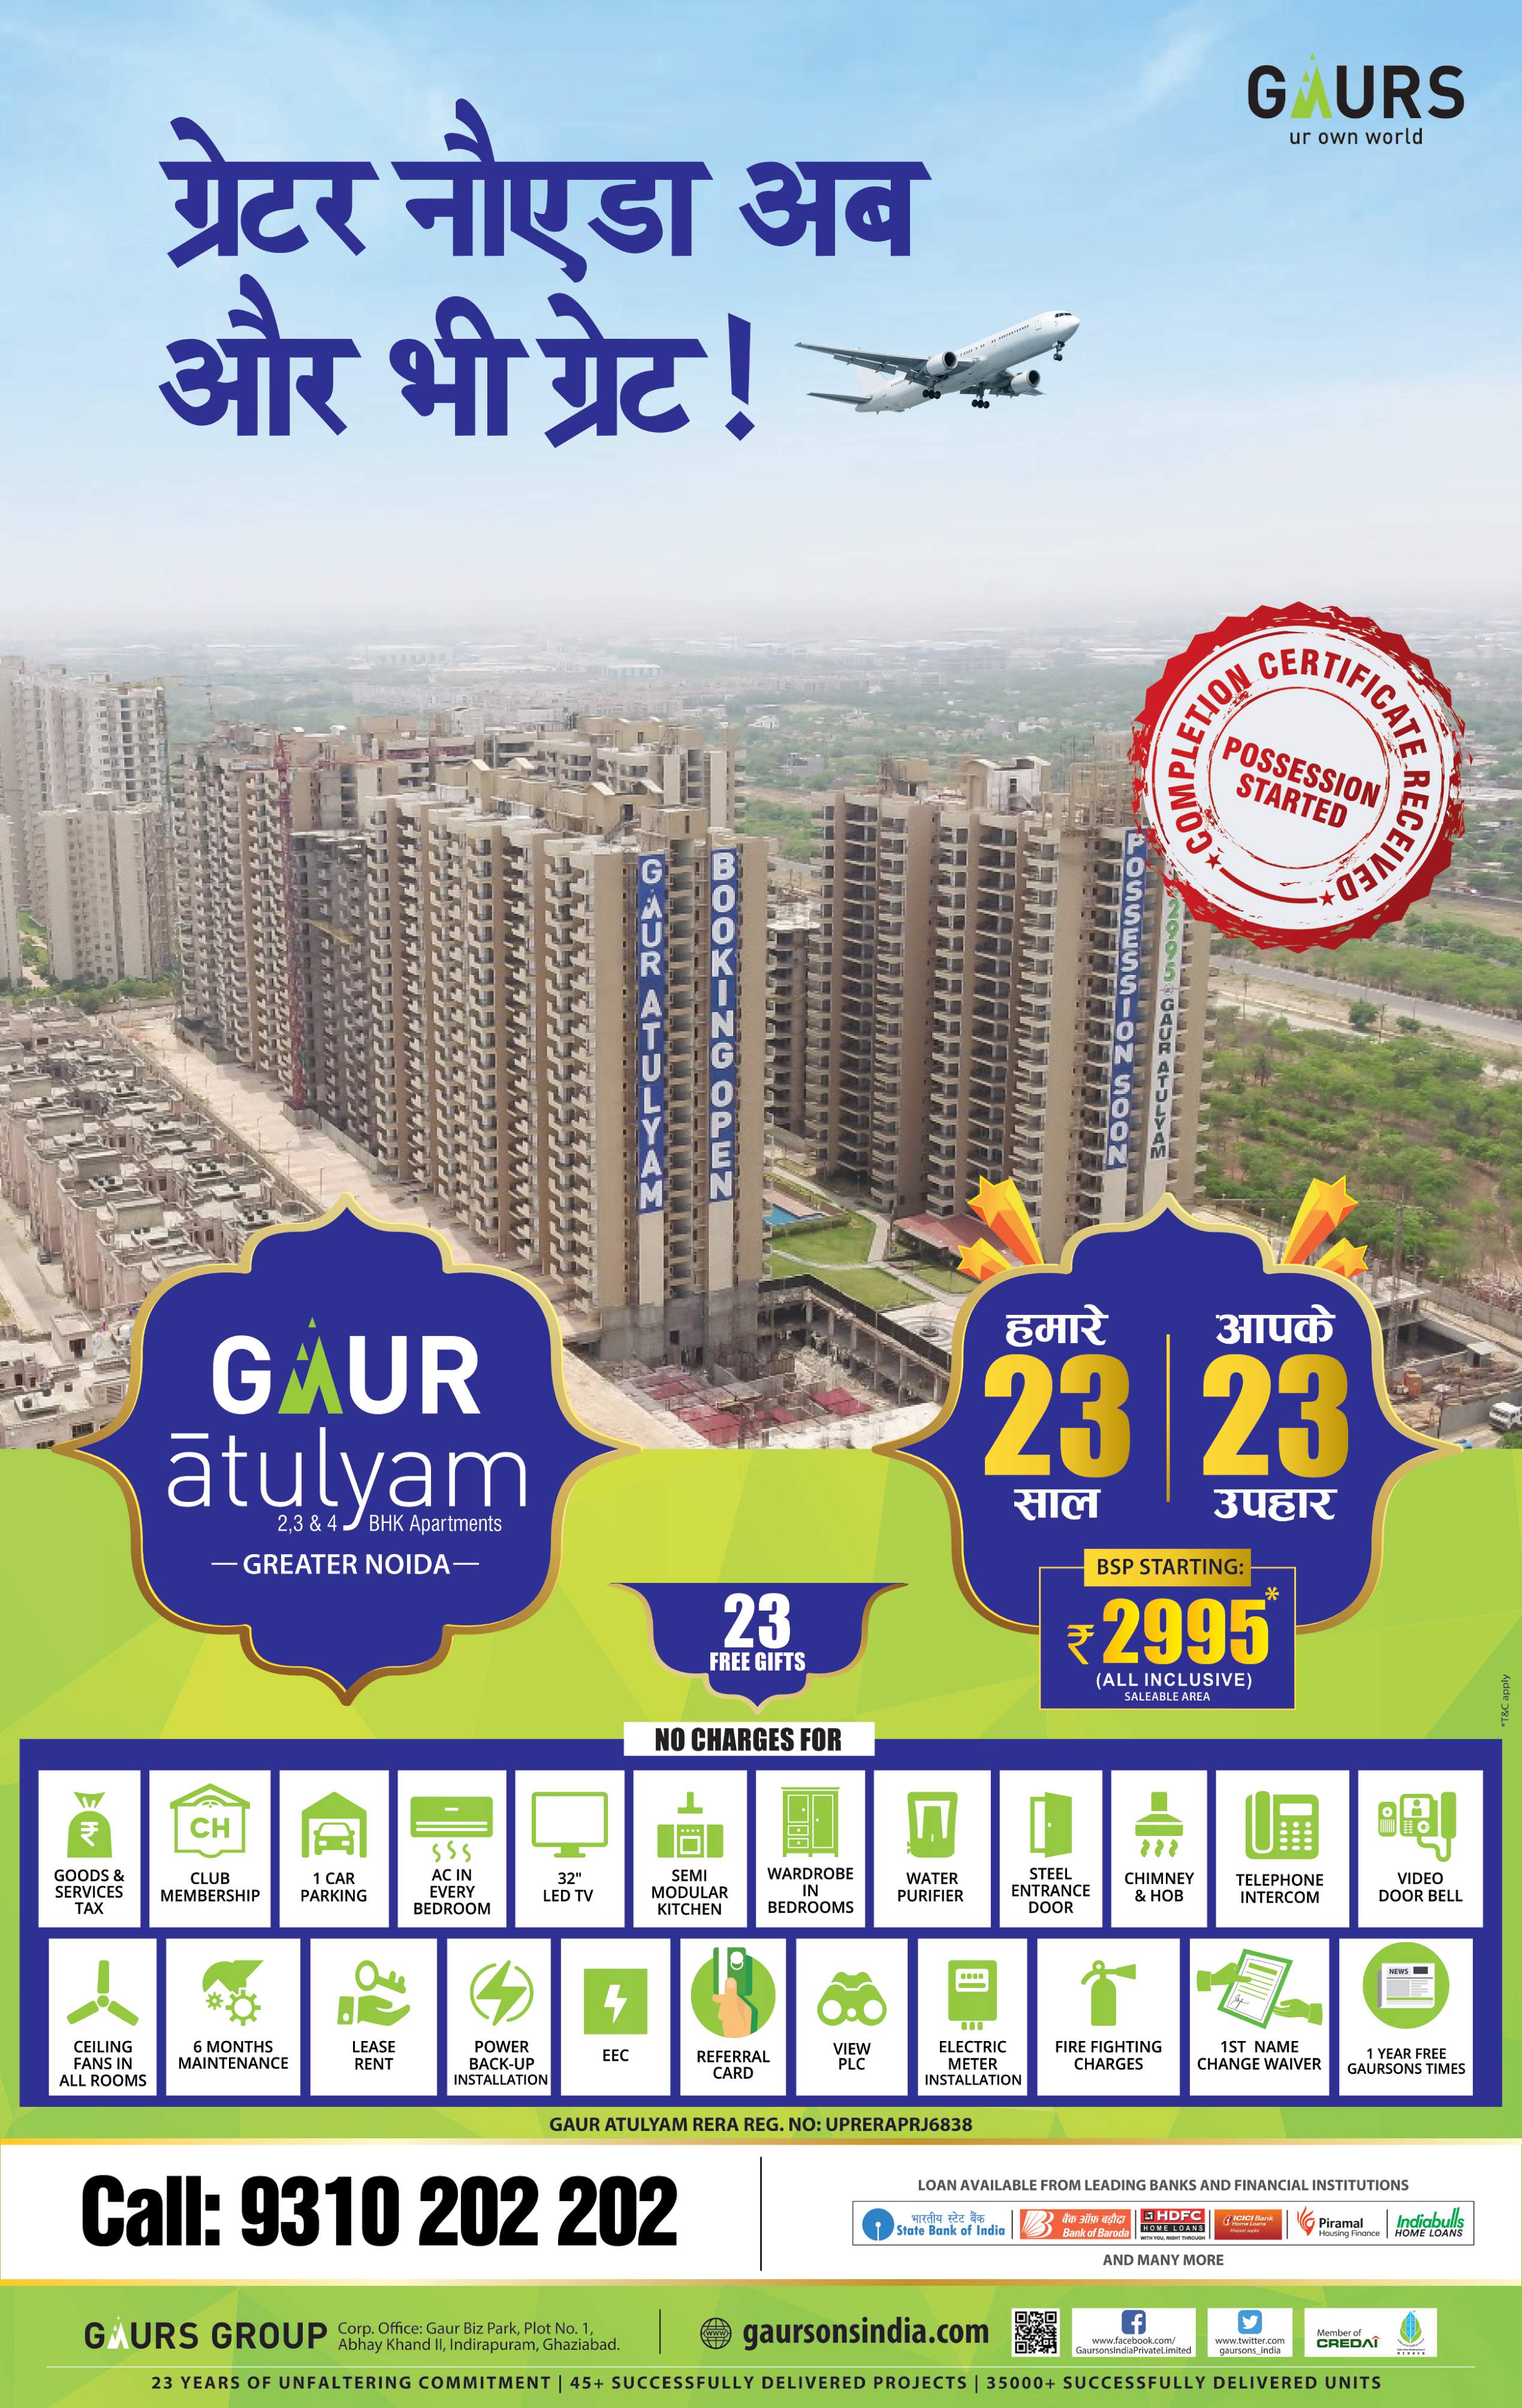 Gaurs Homes Bst Starting Rs 2995 Per Sft Ad - Advert Gallery